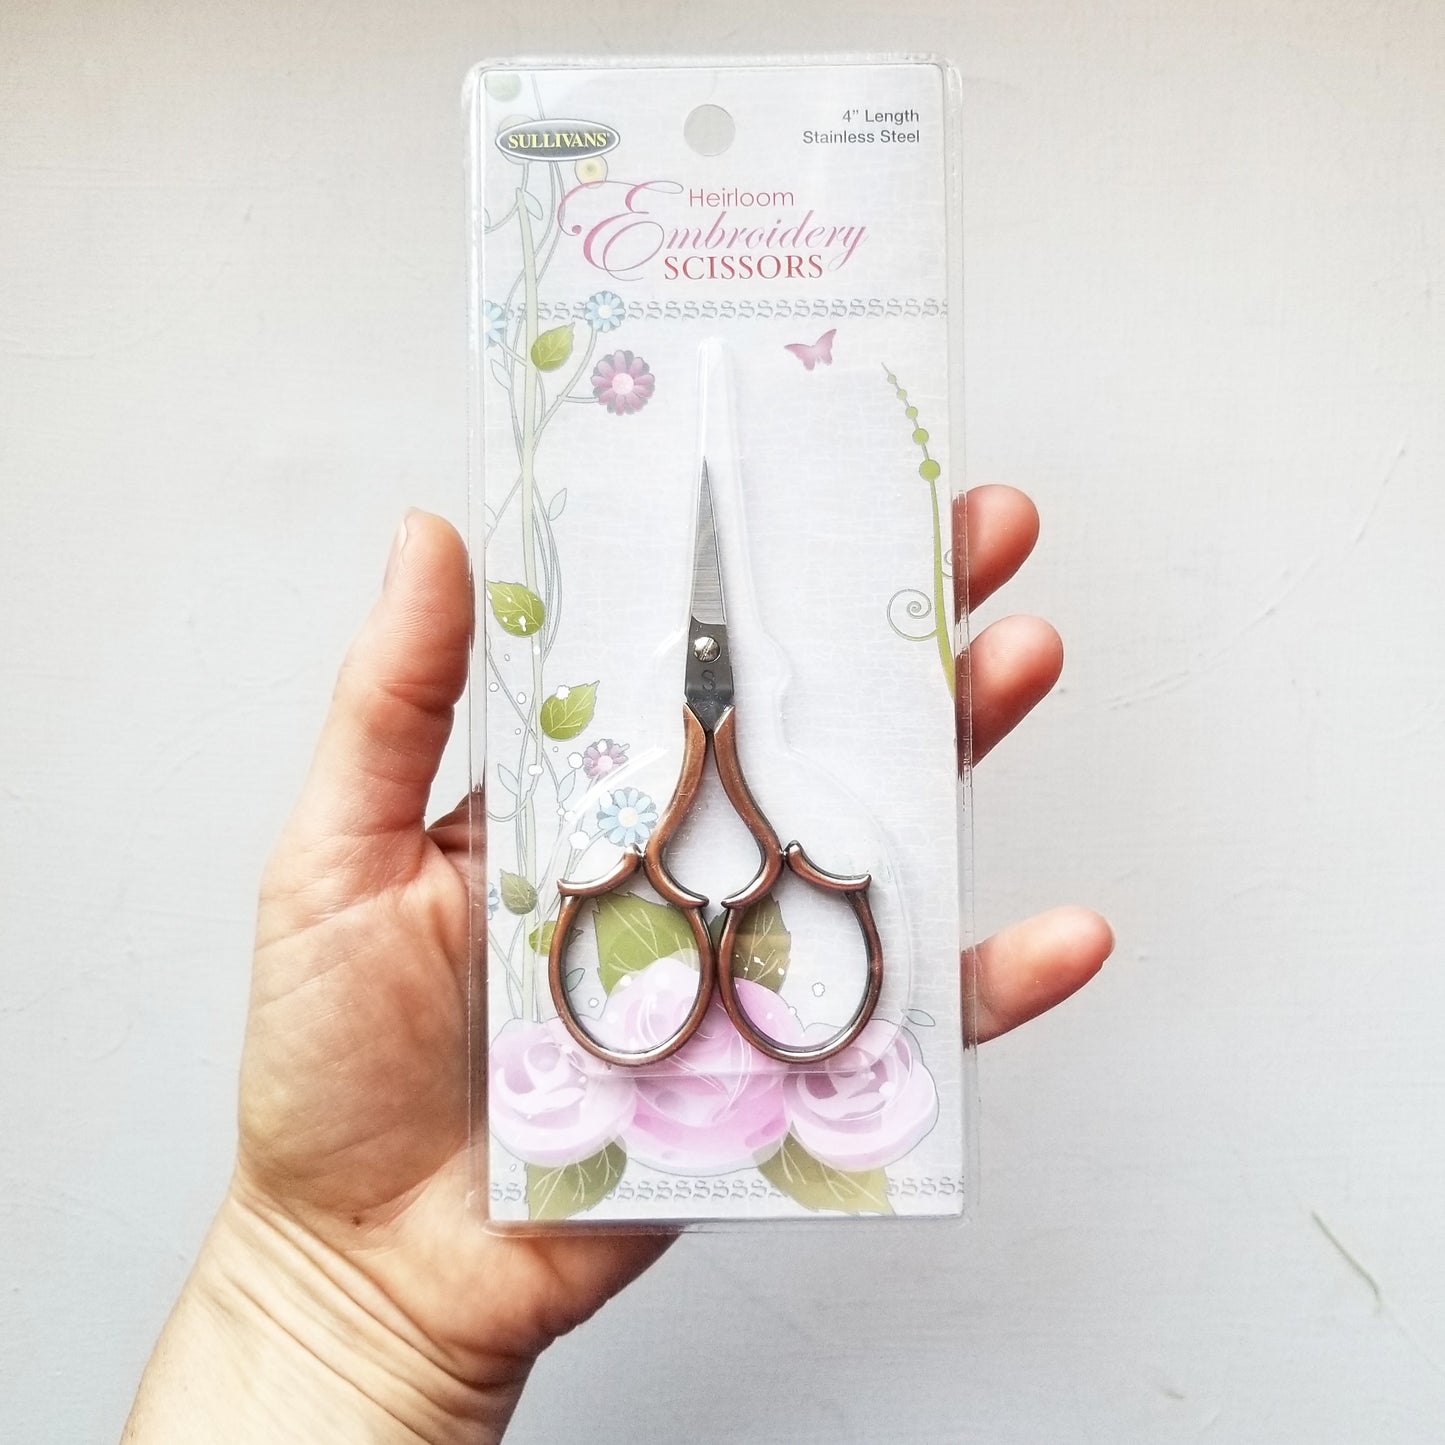 Copper Leaf Embroidery Scissors